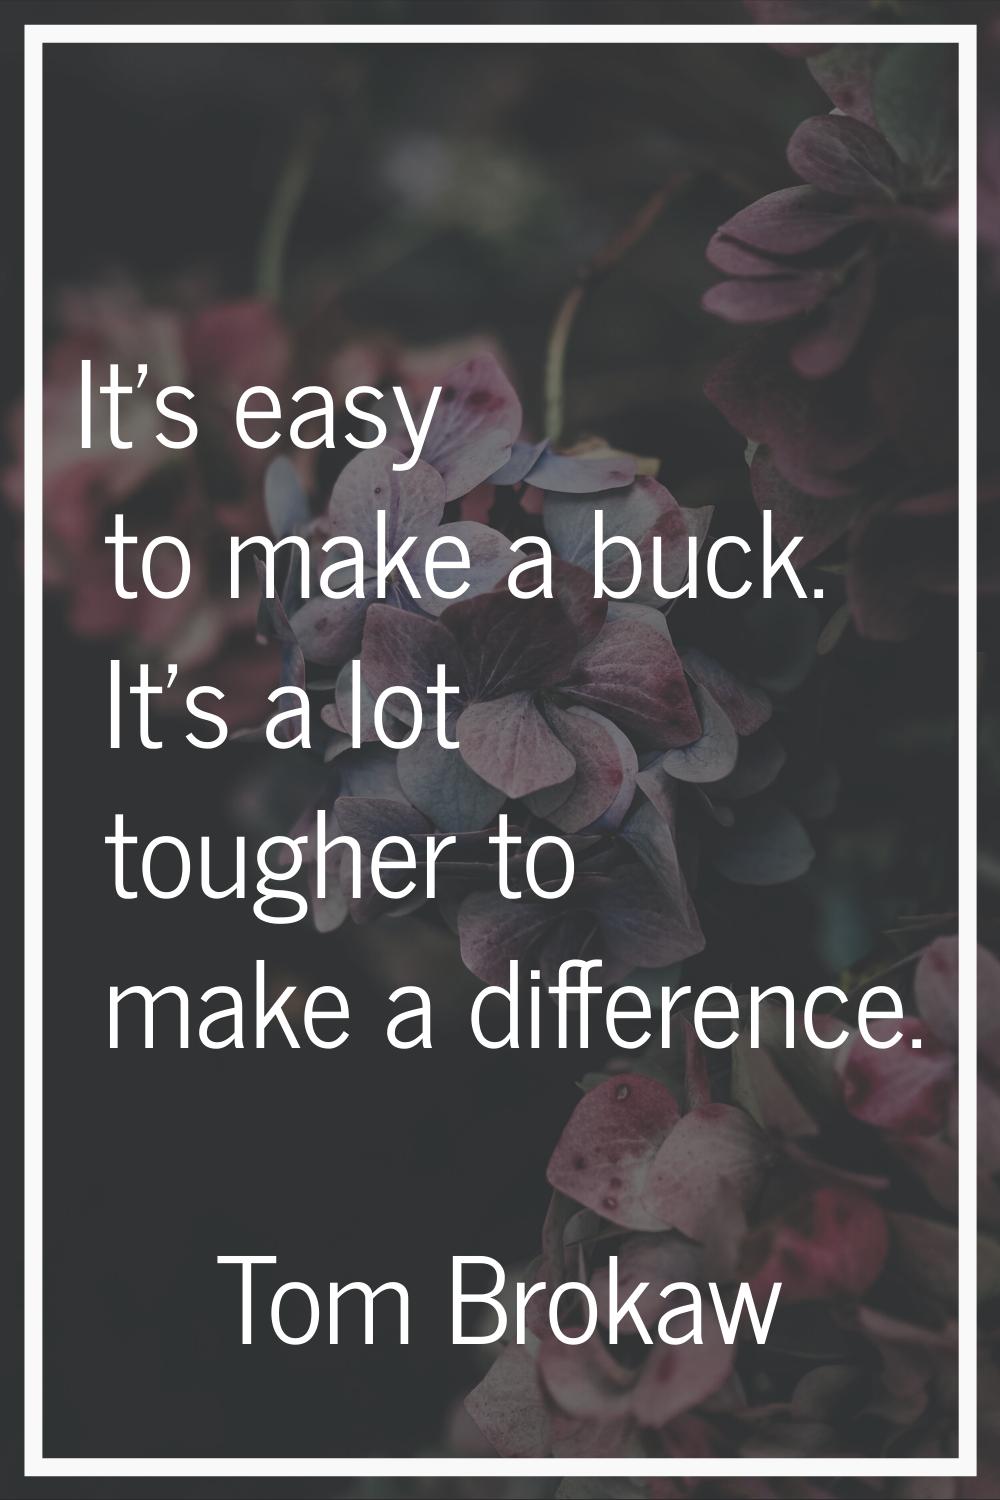 It's easy to make a buck. It's a lot tougher to make a difference.